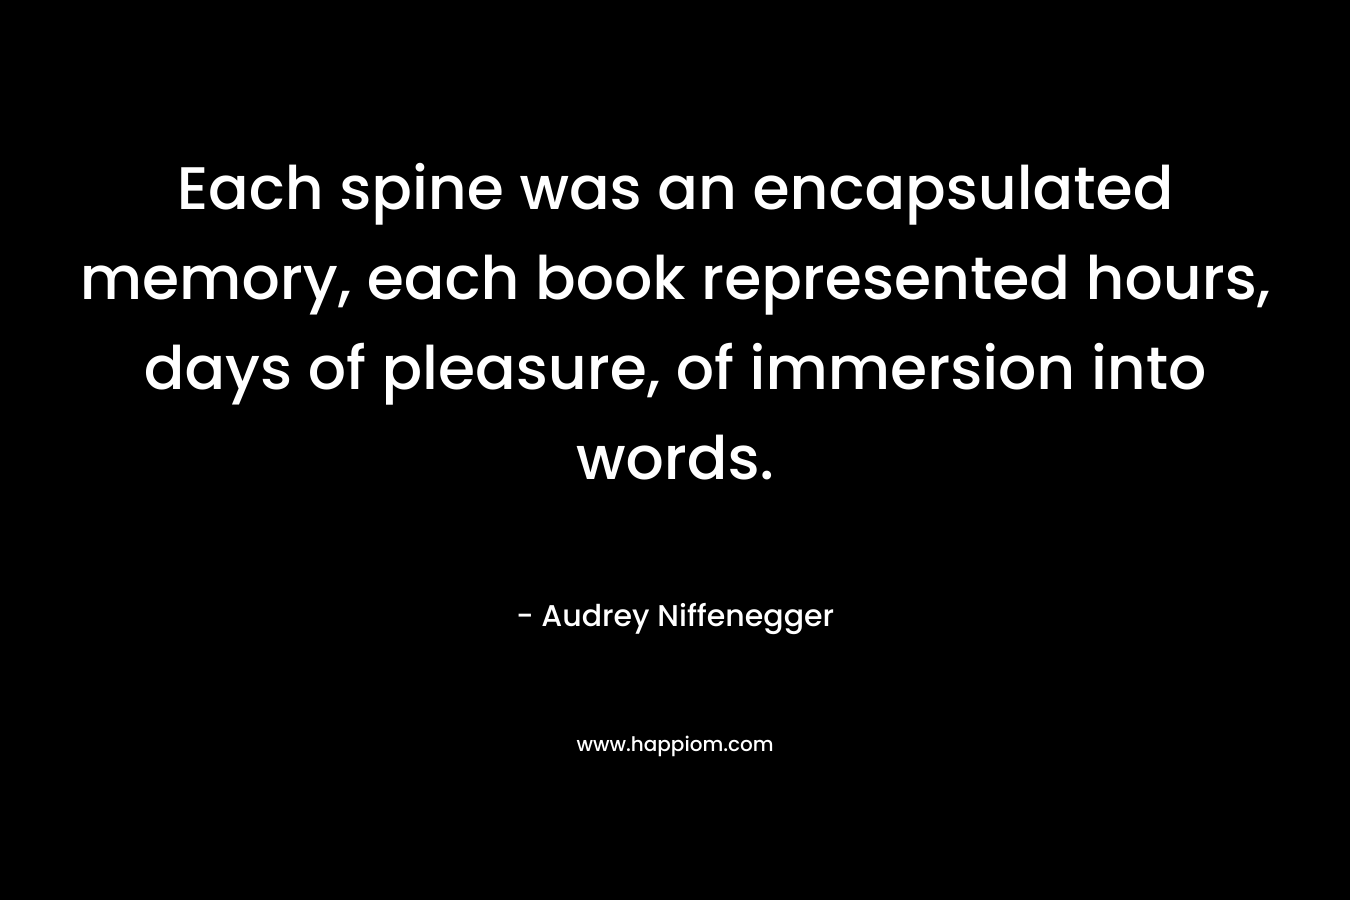 Each spine was an encapsulated memory, each book represented hours, days of pleasure, of immersion into words. – Audrey Niffenegger